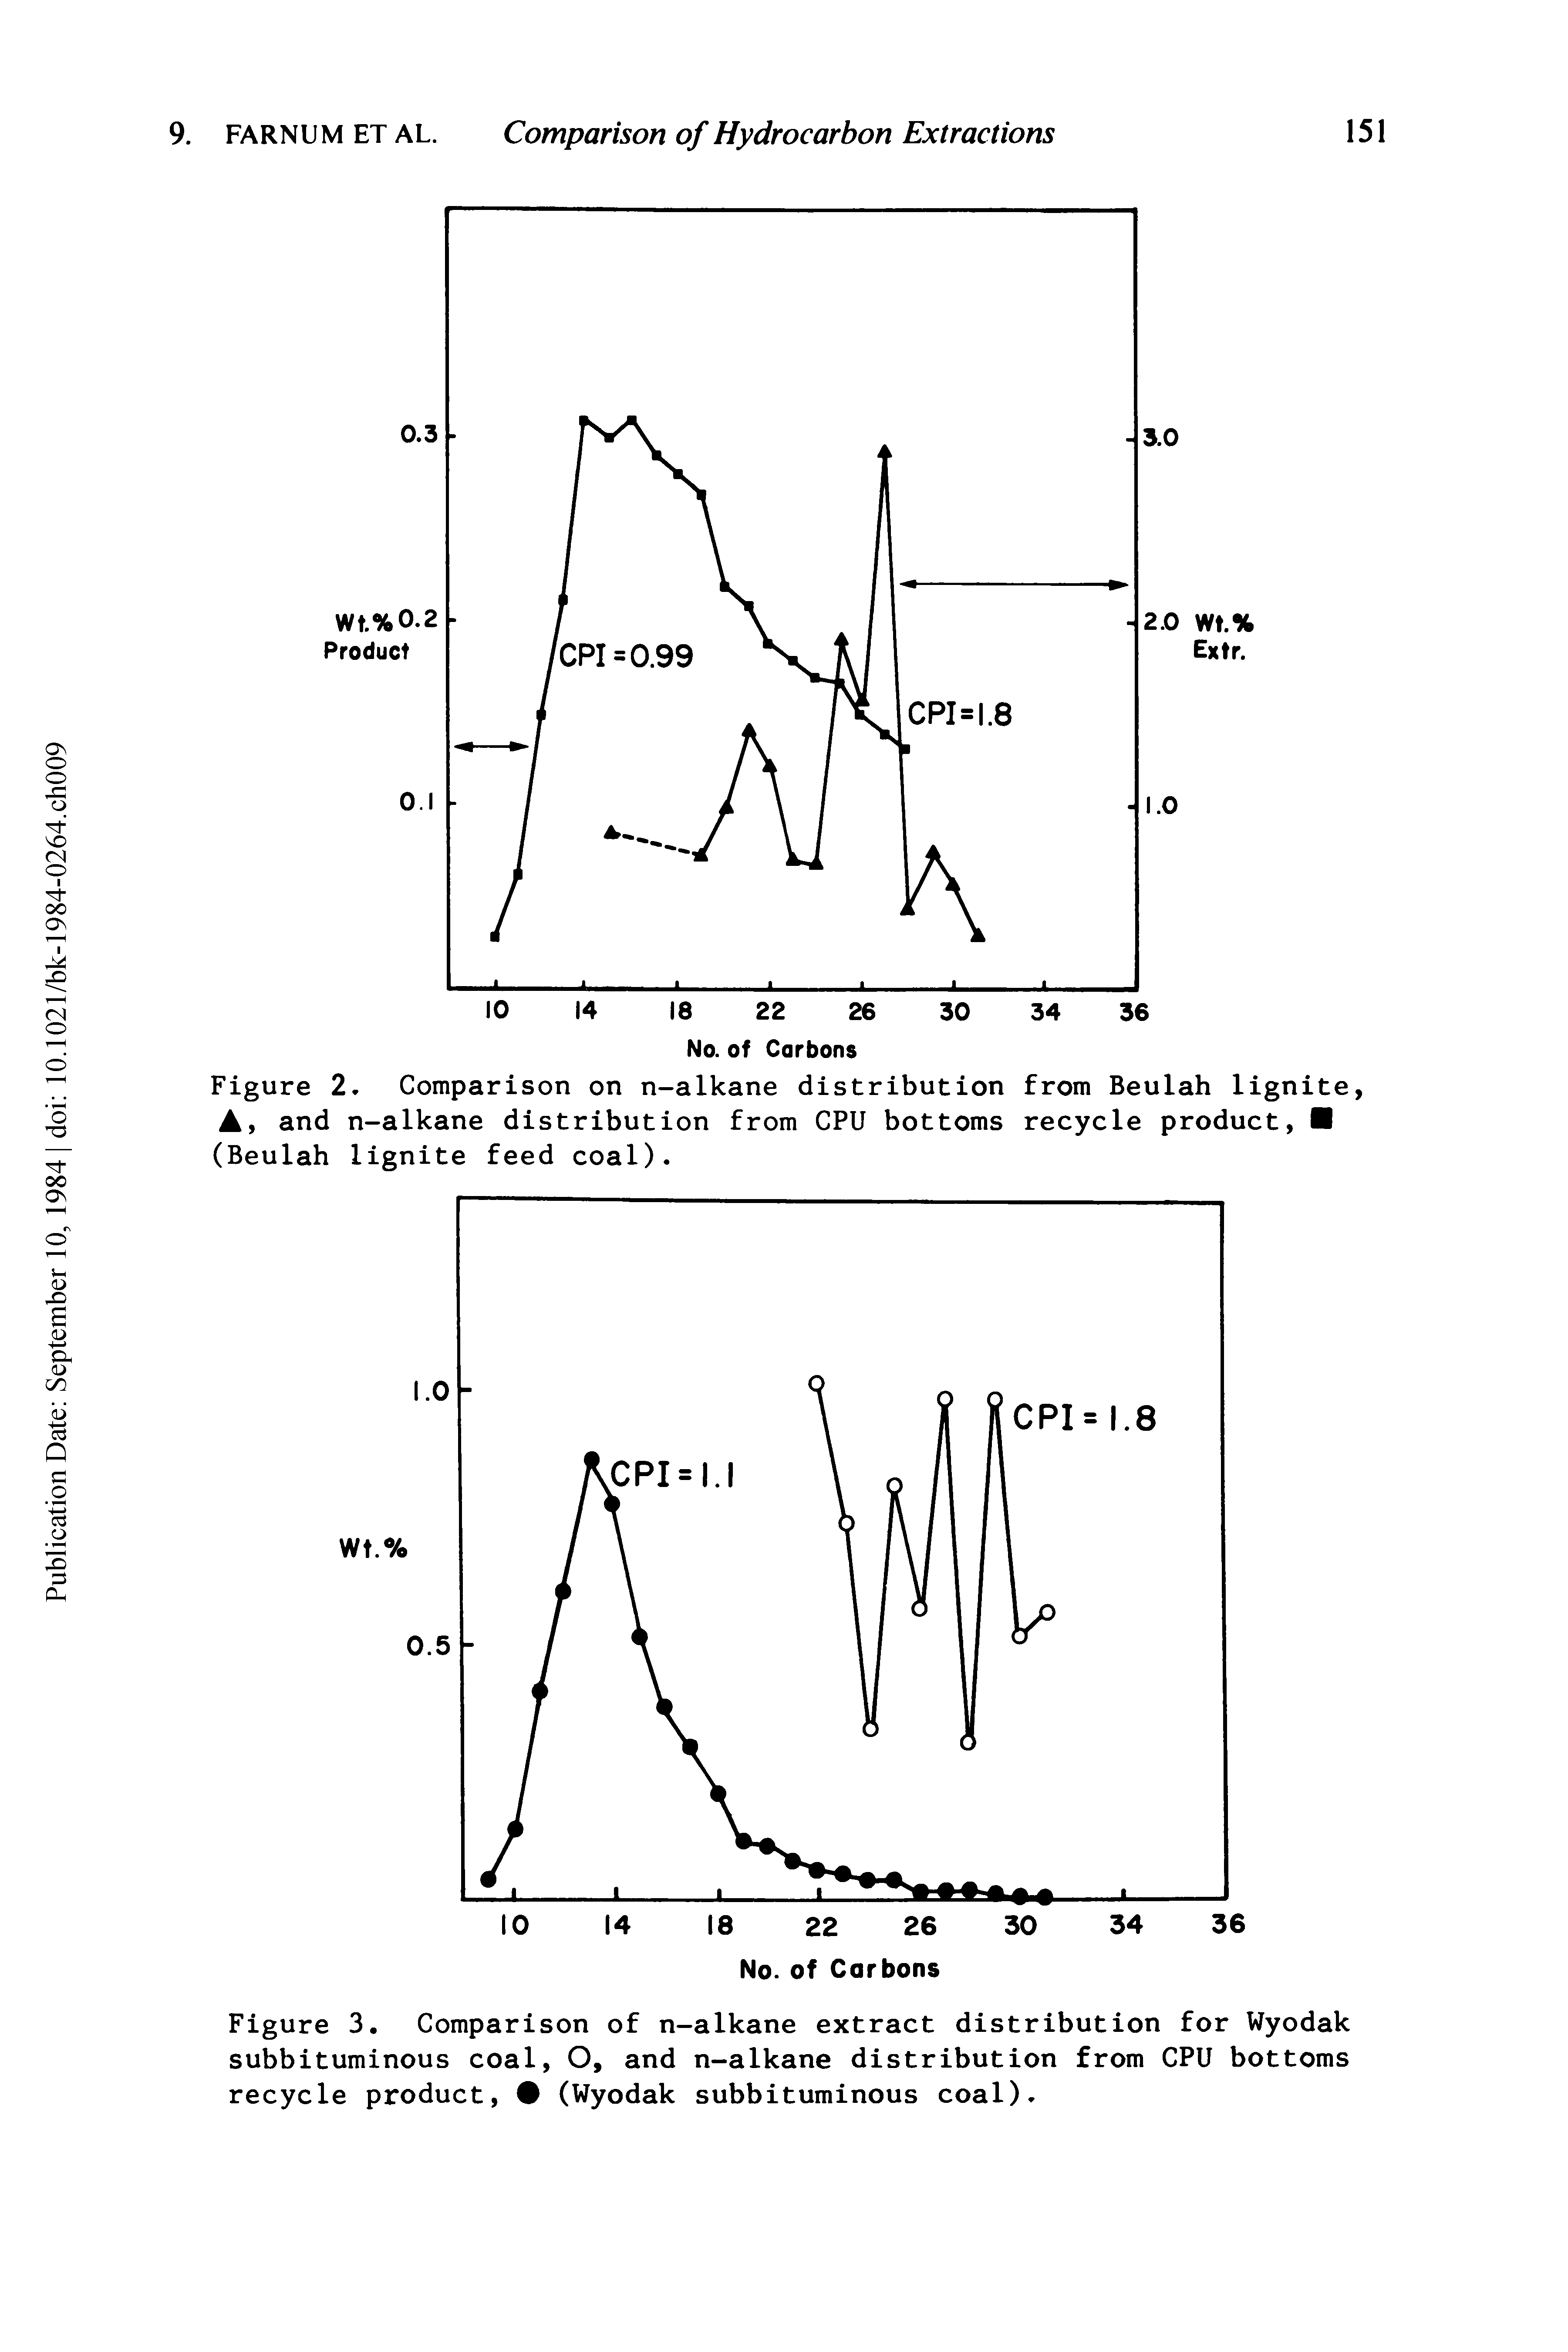 Figure 3. Comparison of n-alkane extract distribution for Wyodak subbituminous coal, O, and n-alkane distribution from CPU bottoms recycle product, (Wyodak subbituminous coal).